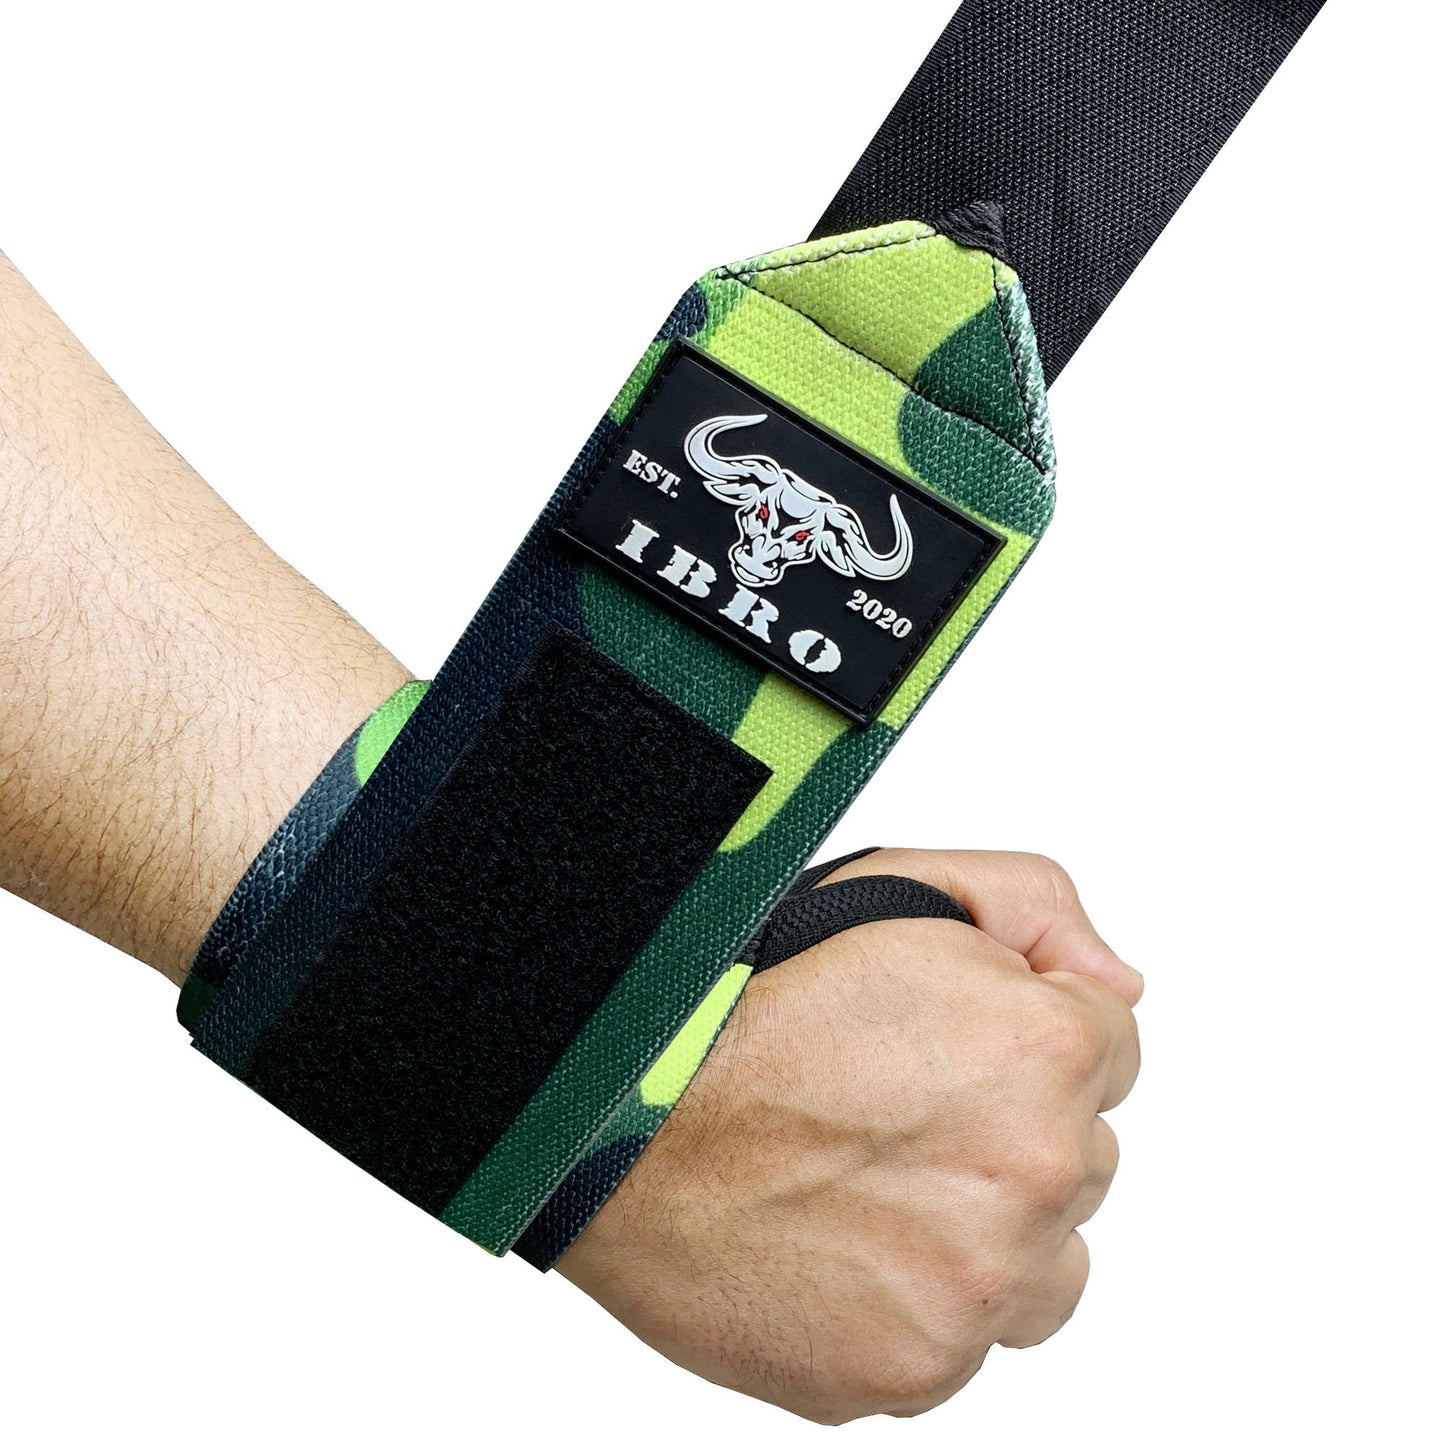 IBRO Weightlifting Wrist Wraps, 24” Premium Wrist Support, Avoid Injury, Best Wrap for Powerlifting, Weightlifting, Gym Workouts, Strength Training, Cross Training for Men & Women Green Camo